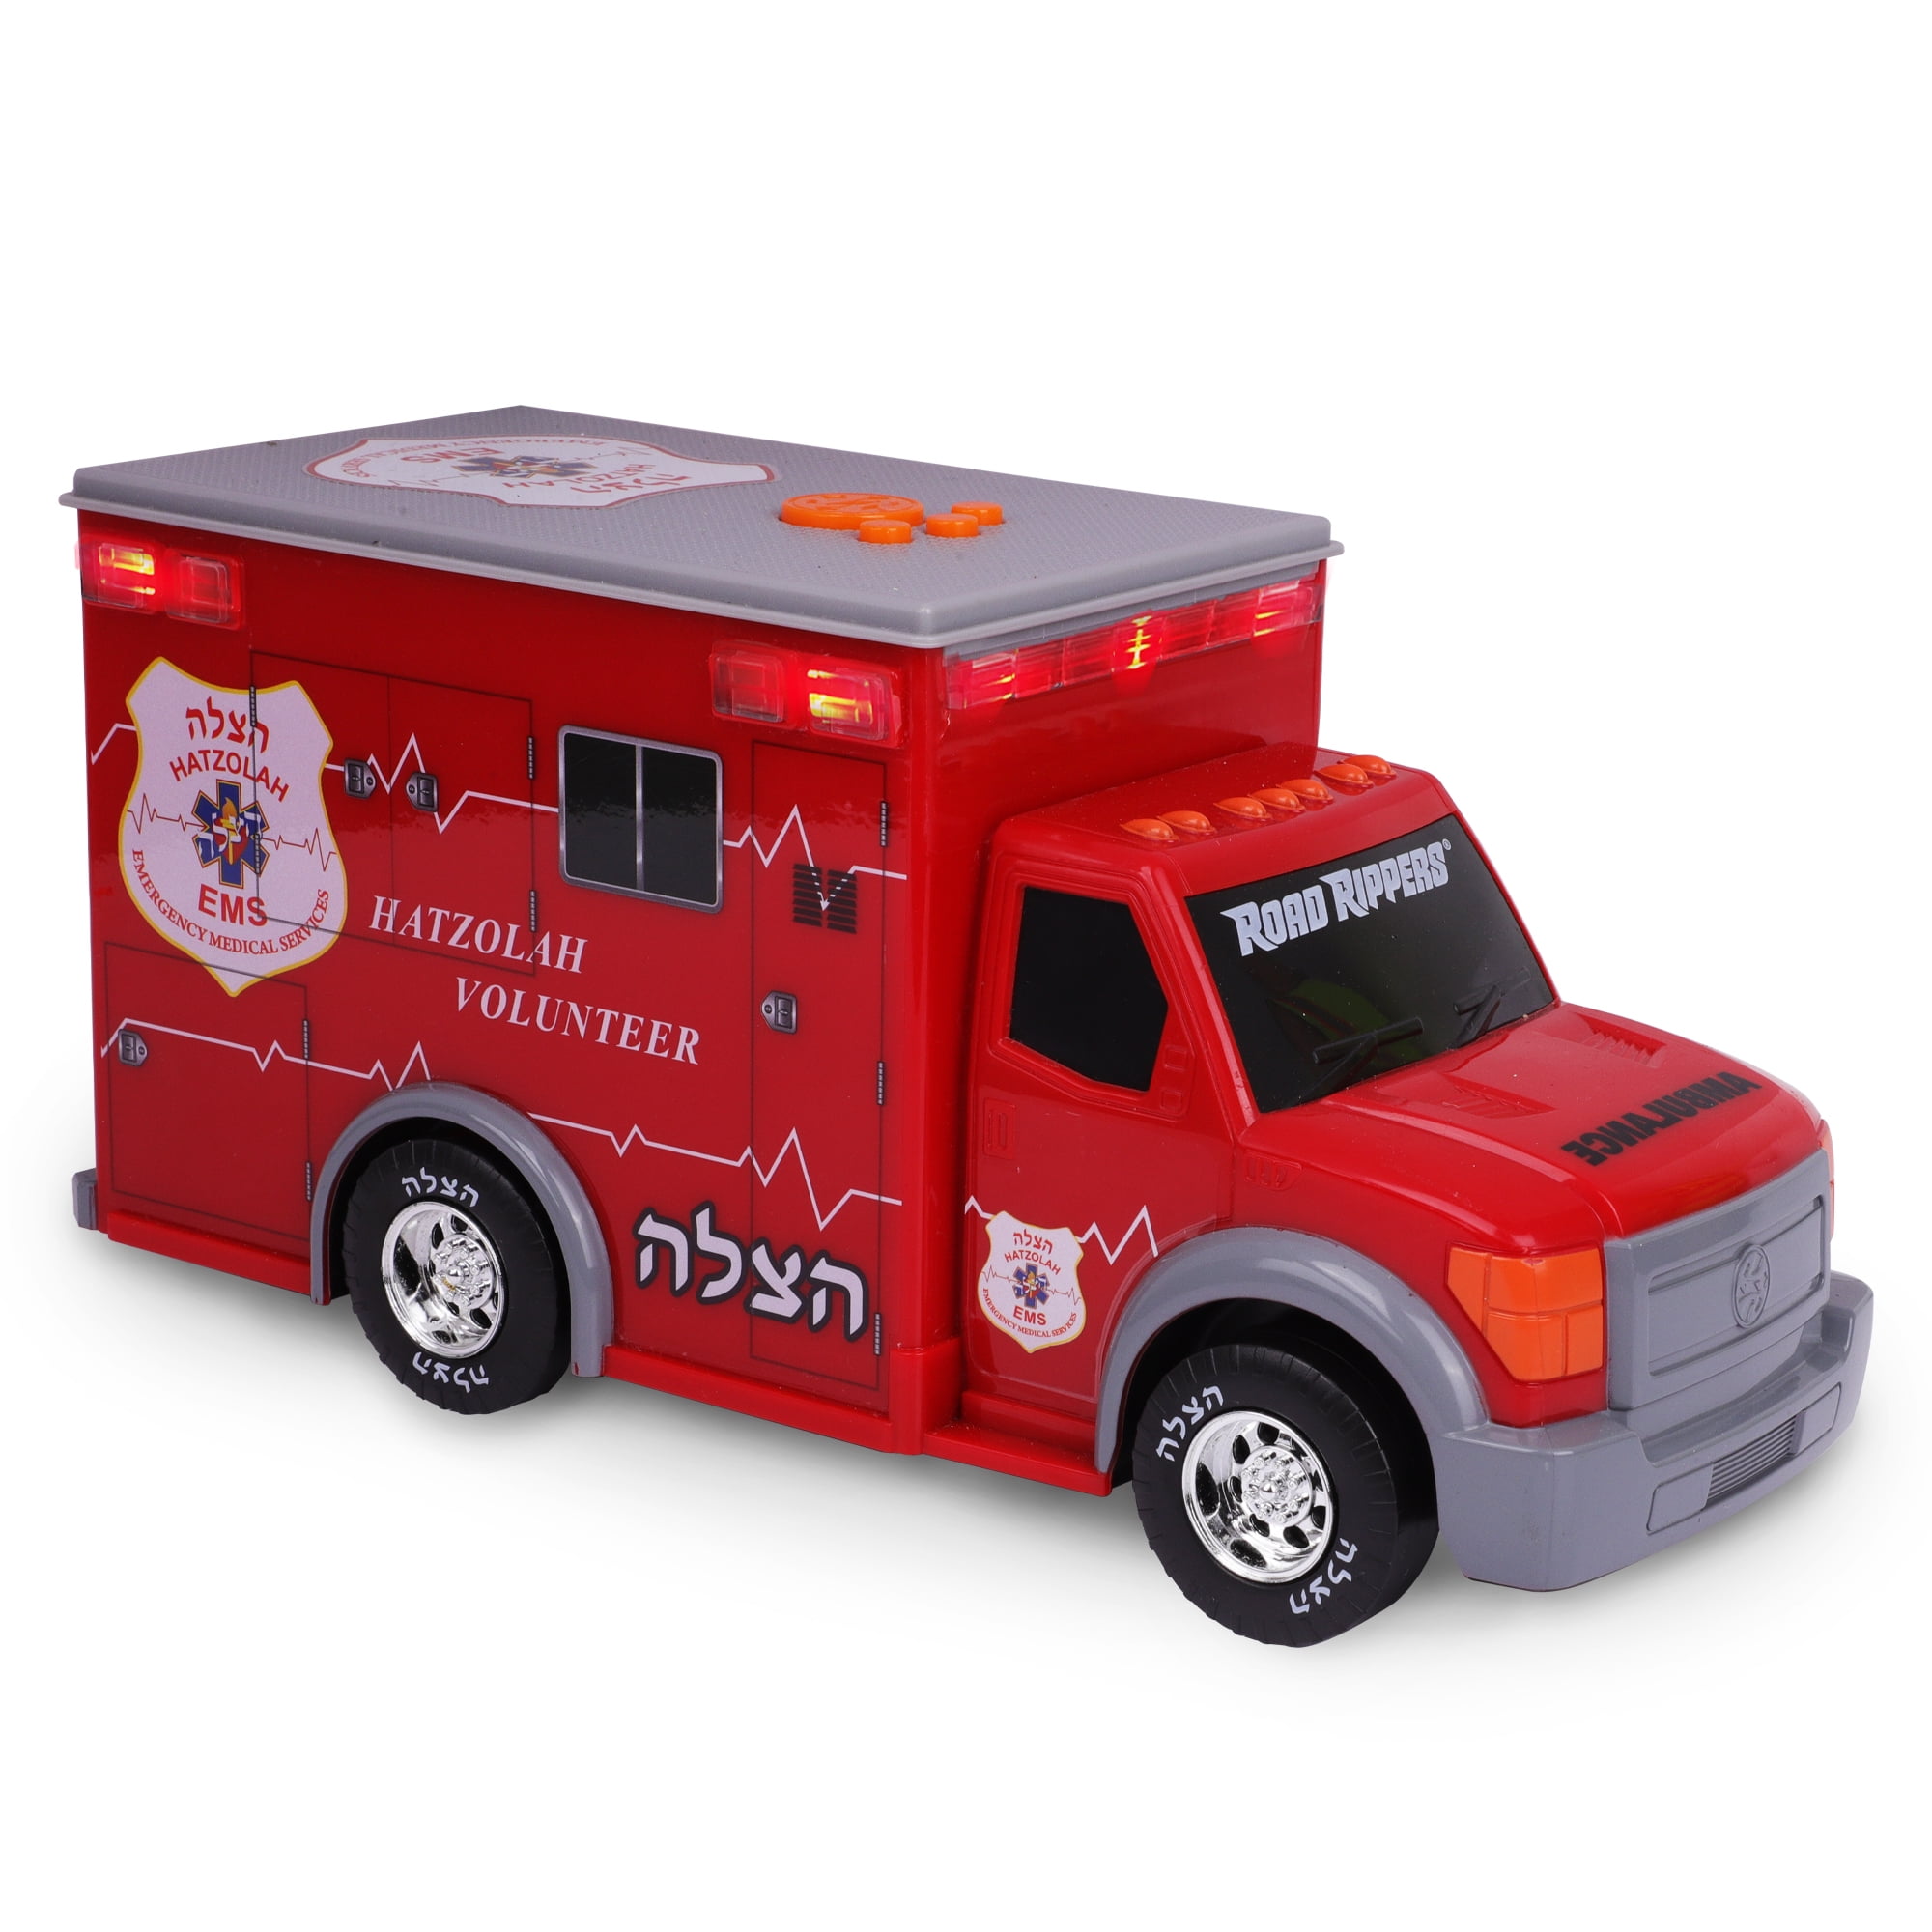 Ambulance Toy Rescue  Friction with light & sound Toy Chef vehicle  Rugged Racer 